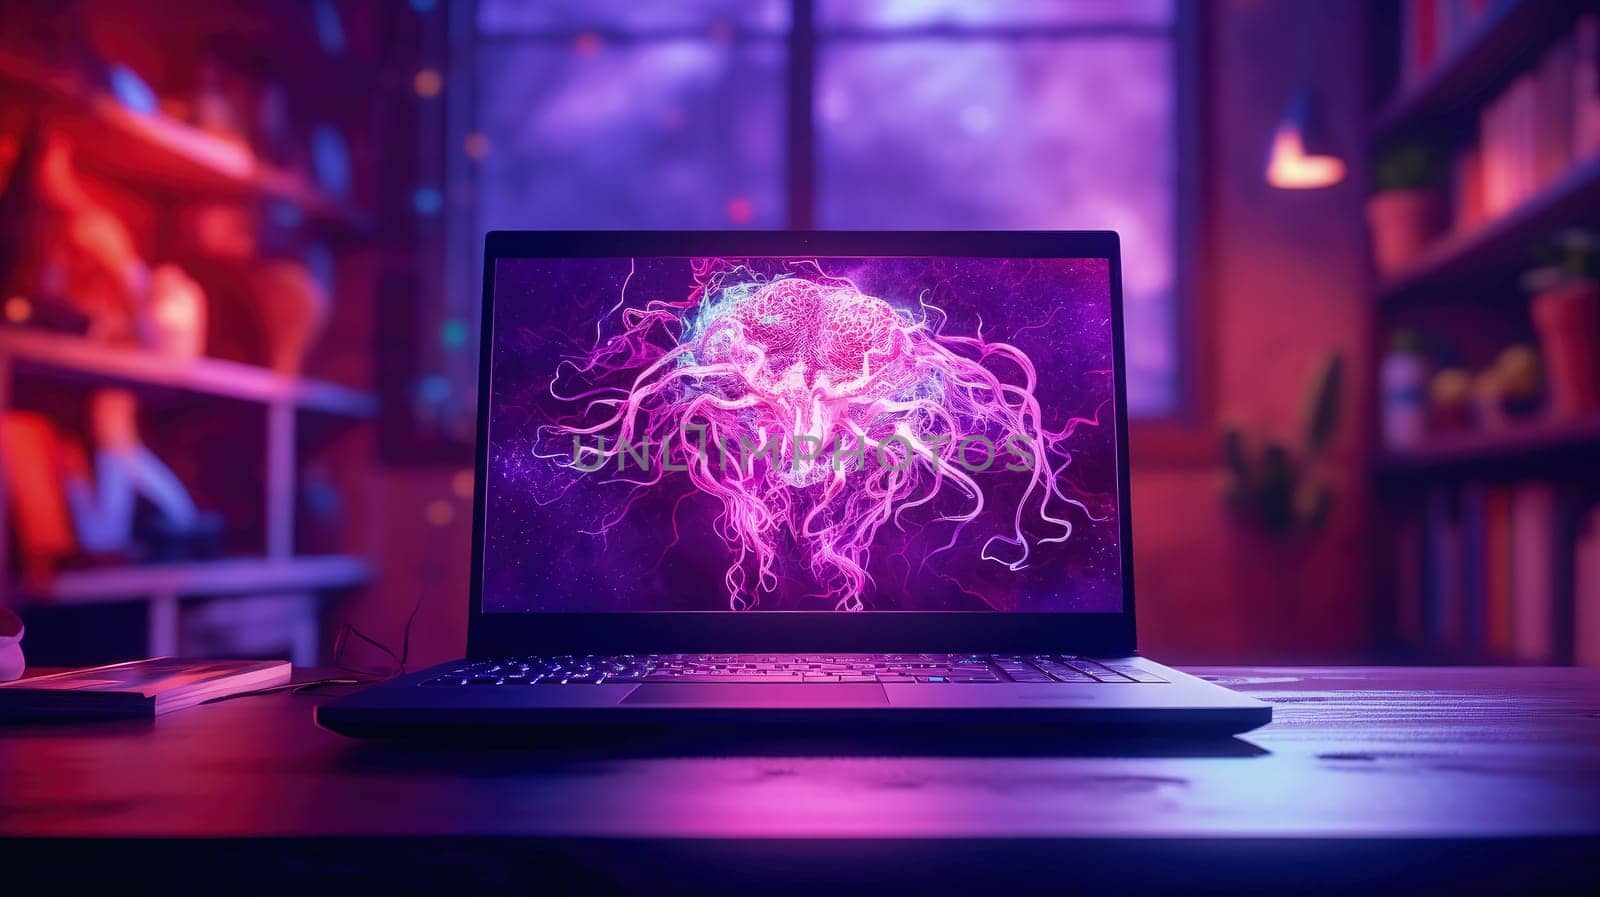 Neurons on a laptop screen in a purple neon room. The concept of artificial intelligence development. High quality photo